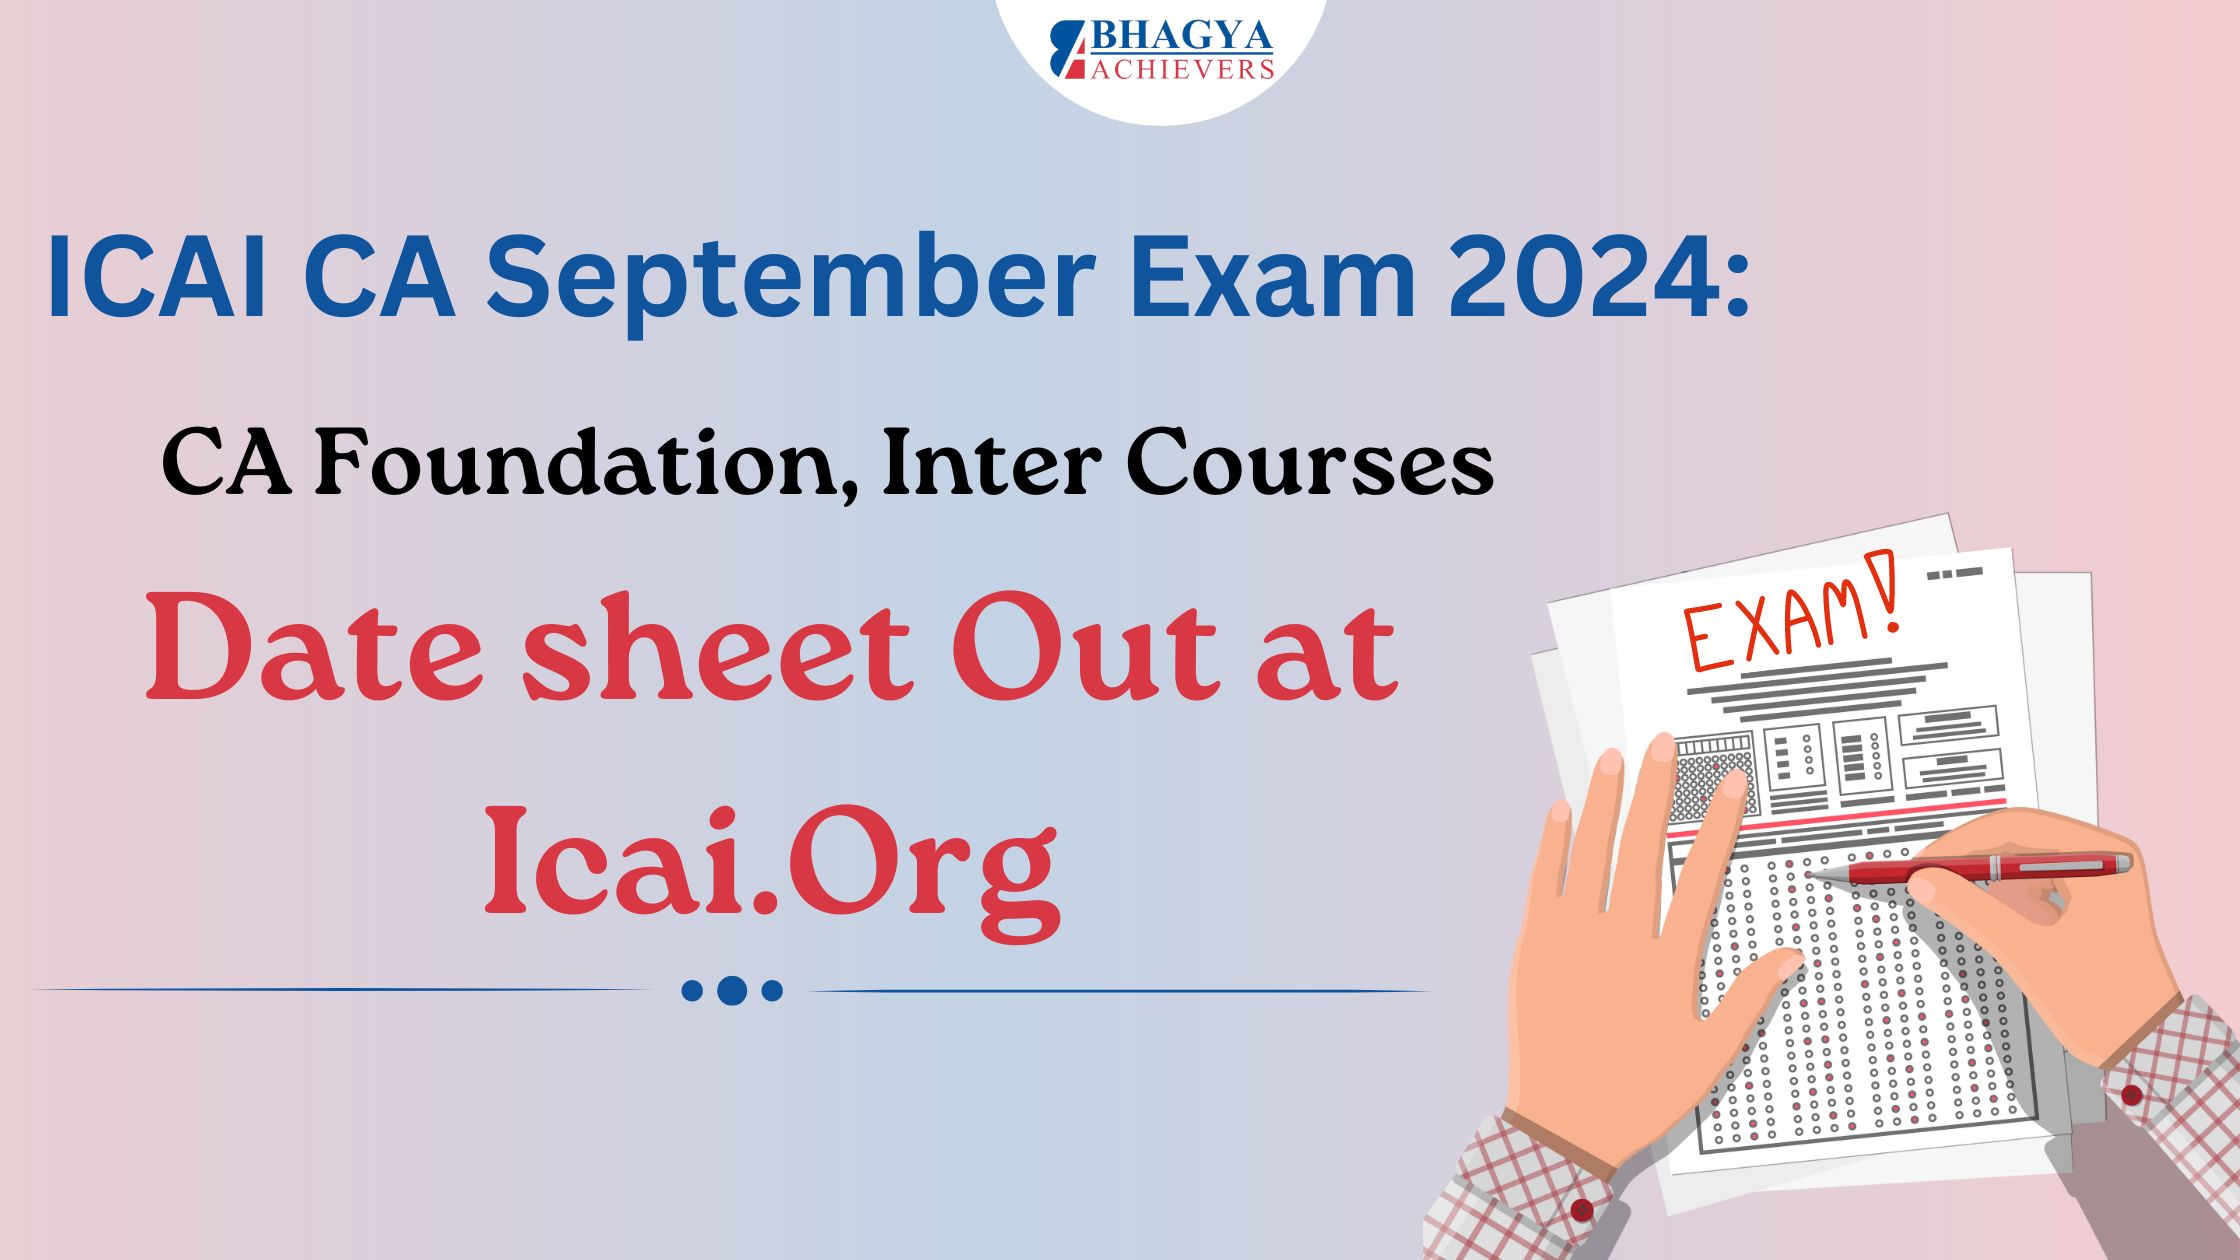 ICAI CA September Exam 2024: CA Foundation, Inter Courses Date sheet Out at Icai.Org - Bhagya Achievers